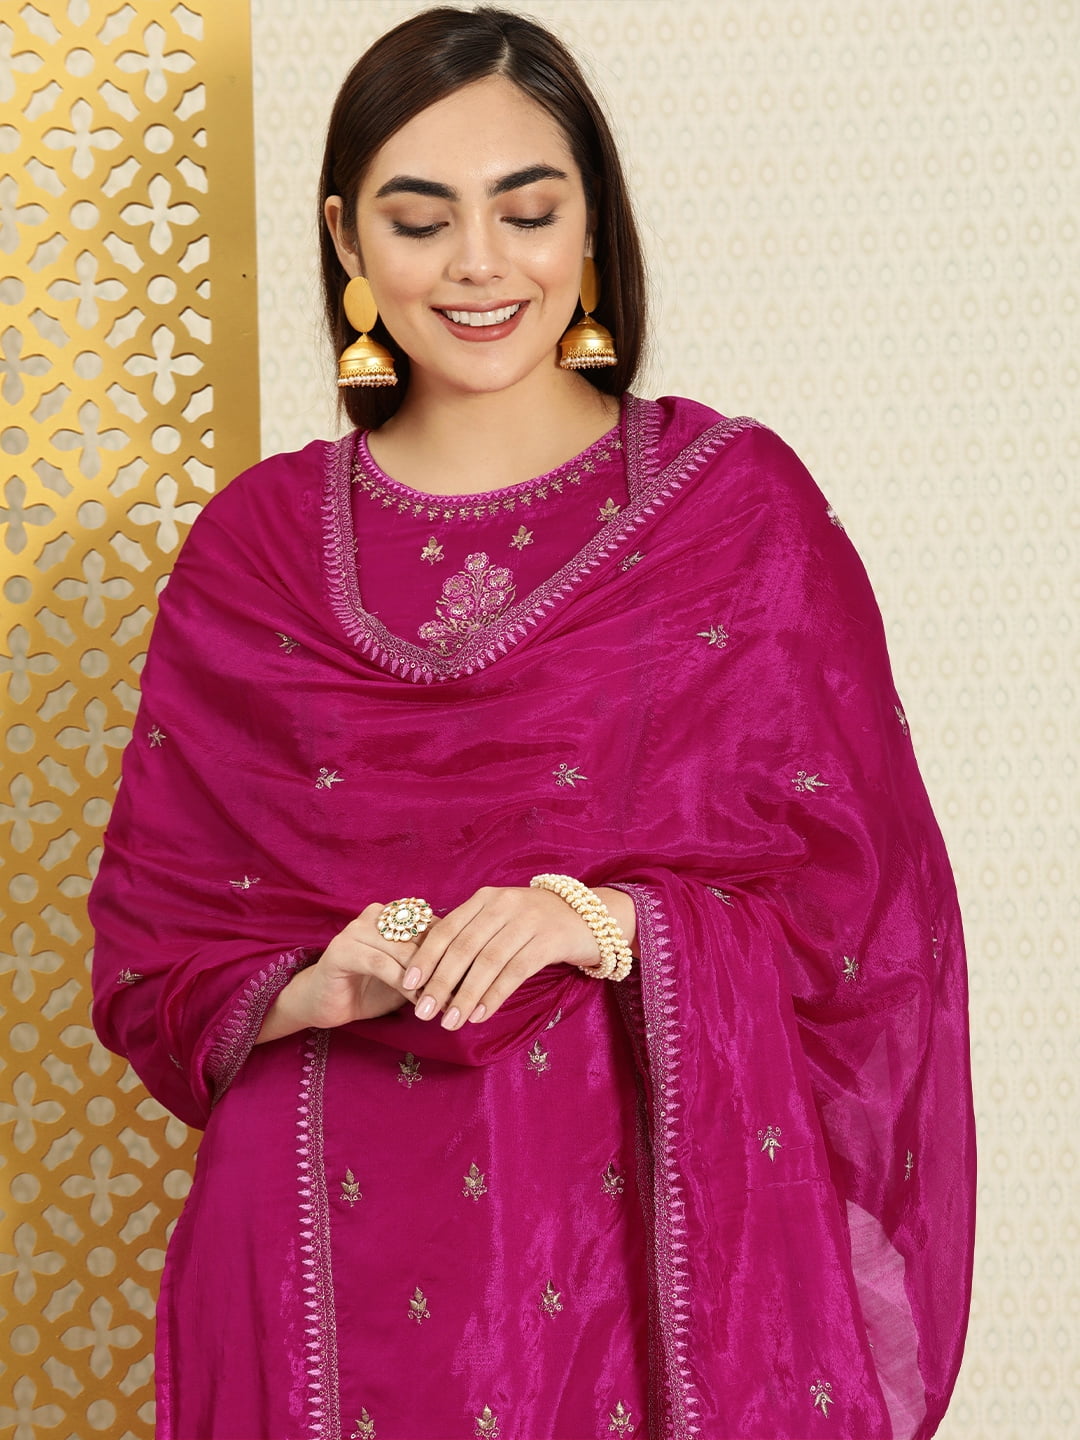 Myntra announces the second edition of its Kurta and Saree Fest; Set to  host ~500 Indianwear brands showcasing over 1,25,000 Styles from across the  country